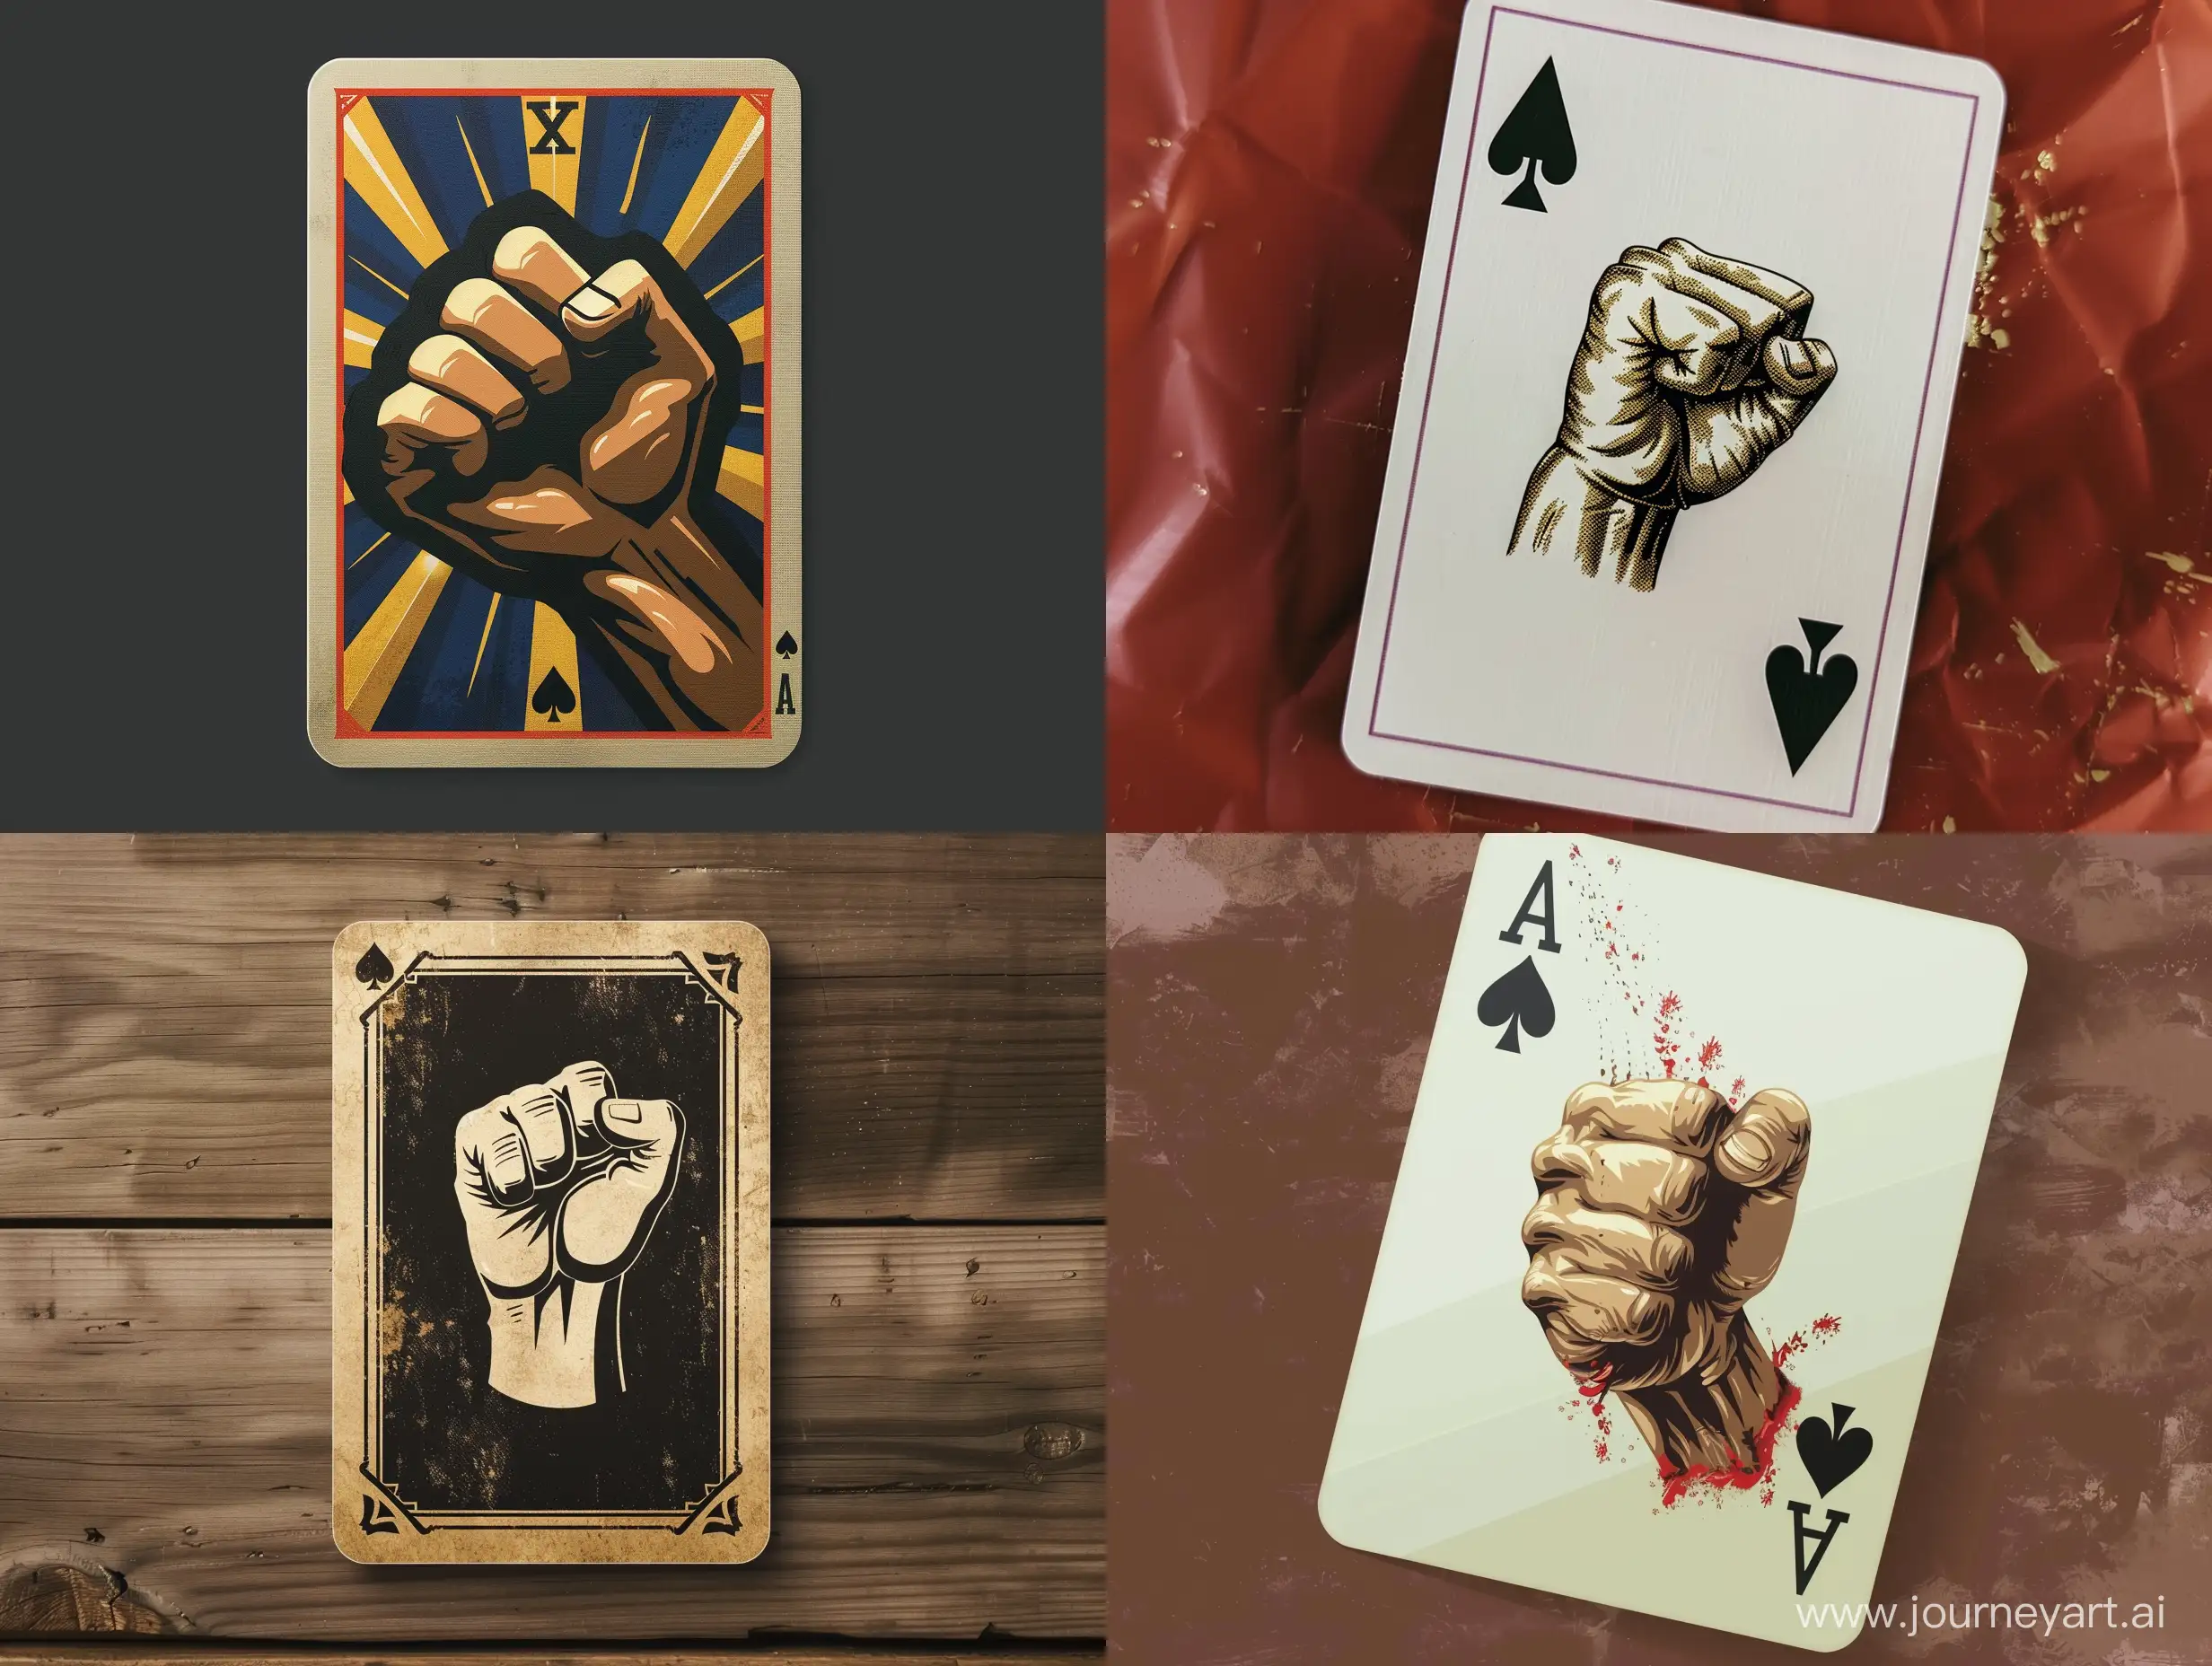 Dynamic-Fist-Movement-Playing-Card-in-Retro-Fighting-Game-Style